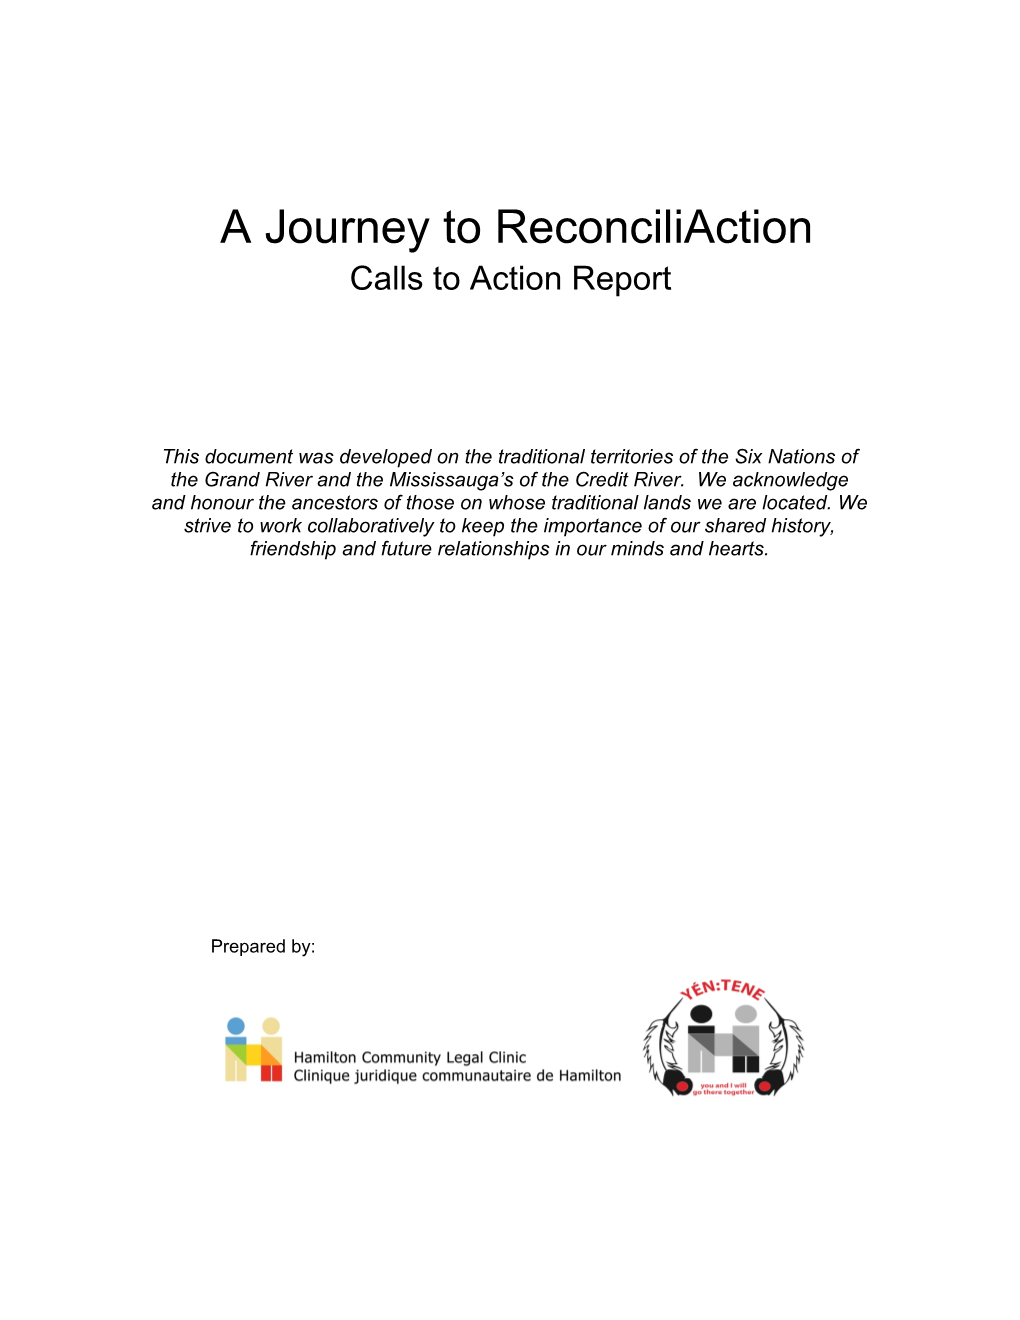 A Journey to Reconciliaction Calls to Action Report